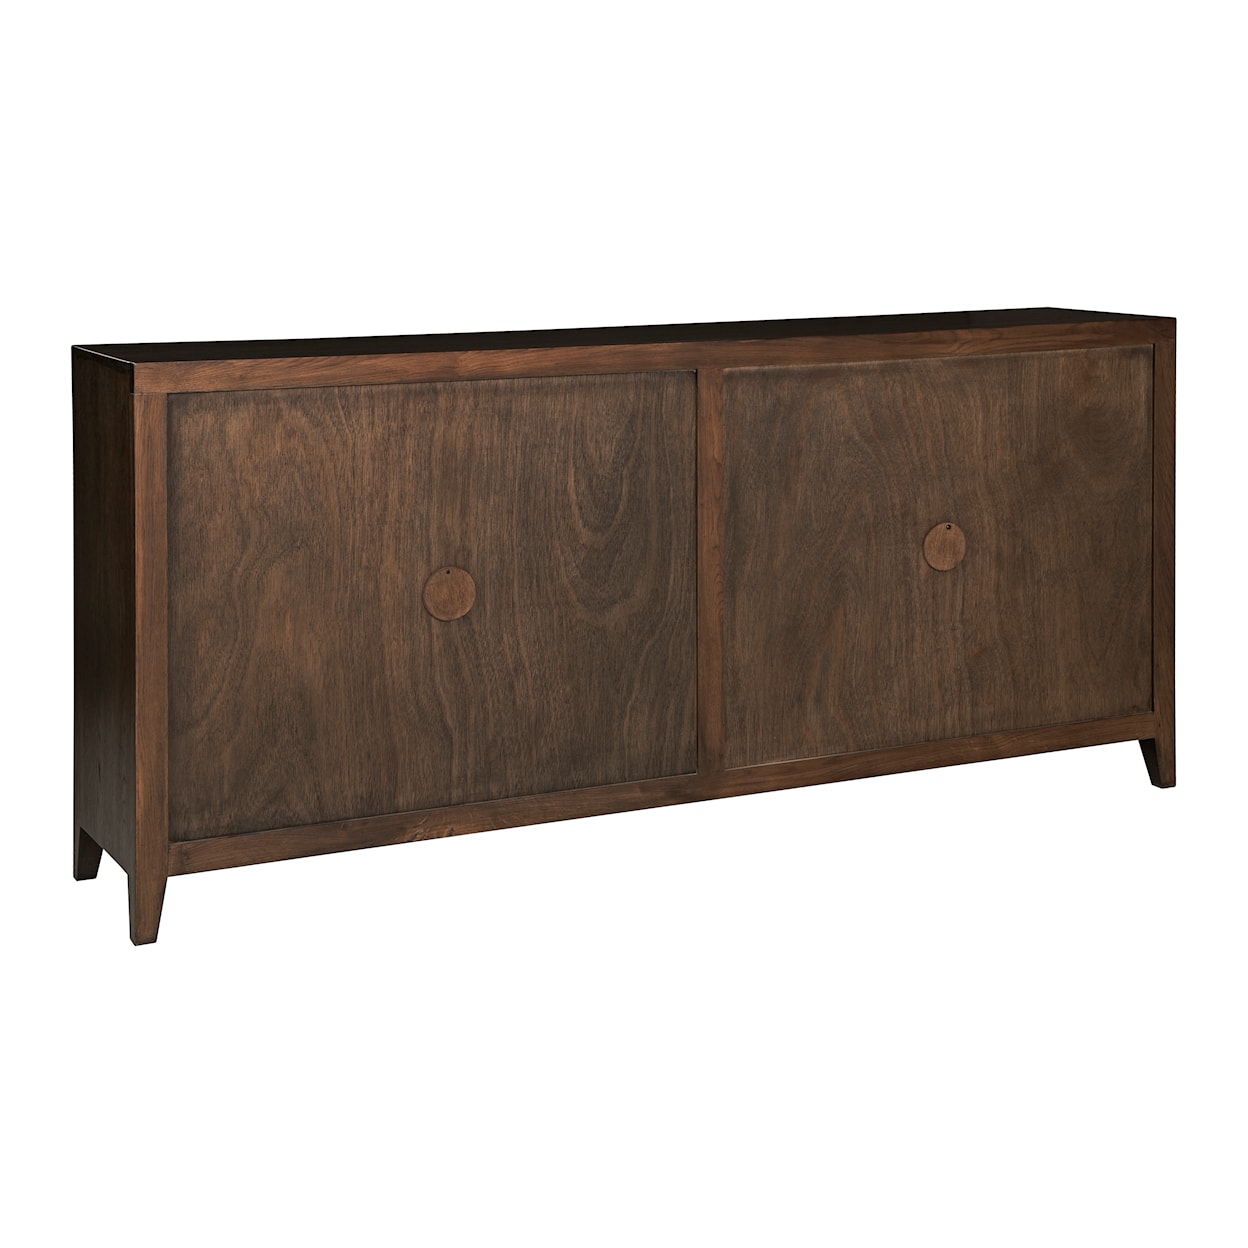 Signature Design by Ashley Furniture Balintmore Accent Cabinet